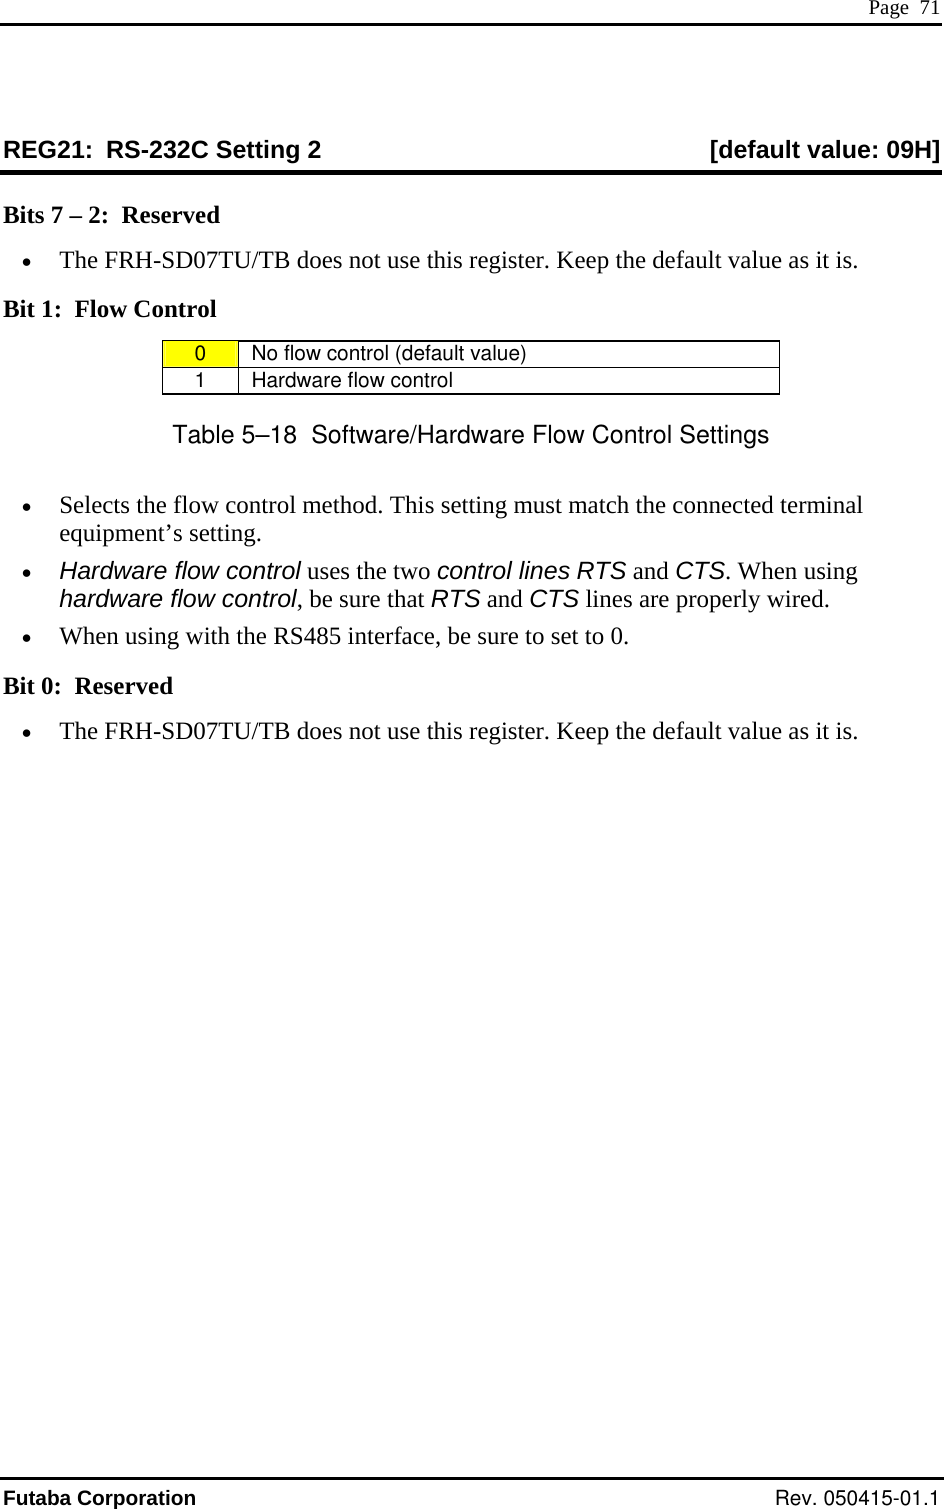  Page  71 REG21:  RS-232C Setting 2  [default value: 09H] Bits 7 – 2:  Reserved •  The FRH-SD0 U/TB oes n use th reg ault value as it is. Bit 1:  Flow Control 7T  d ot  is  ister. Keep the def0   No flow cont  (defa varol ult  lue) 1   Ha ntrordware flow co l Table 5–18  Software/Hardware Flow Control Settings •  Selects the flow control method. This settin onnected terminal equipment’s setting. •  Hardware flo contr control lines R TS. When using hardware flo contr RTS and CTS lines are properly wired. •  When using with the RS485 interface, be sure to set to 0. Bit 0:  Reserved g must match the cw  ol uses the two  TS and Cw  ol, be sure that •  The FRH-SD07TU/TB does not use this register. Keep the default value as it is. Futaba Corporation Rev. 050415-01.1 